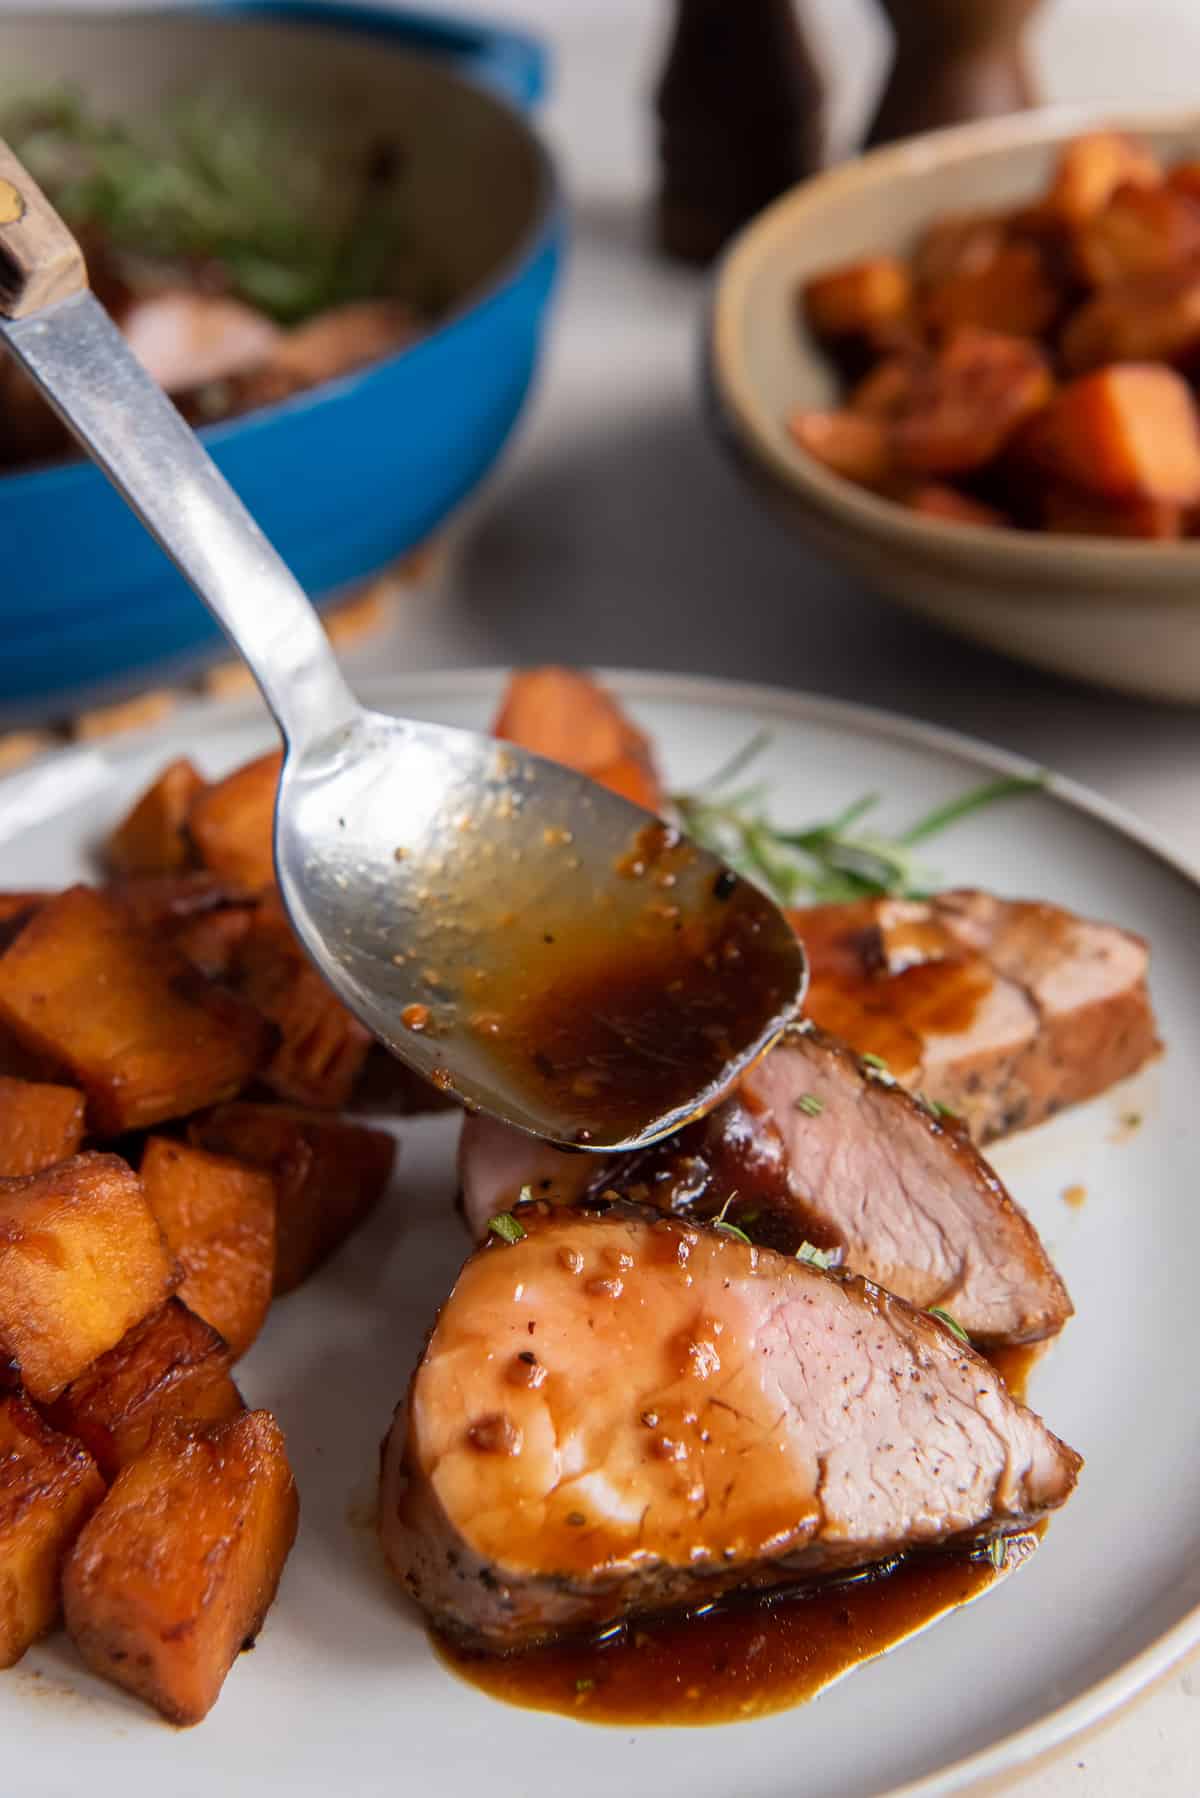 Glaze pours from a spoon over slices of pork tenderloin on a white plate.